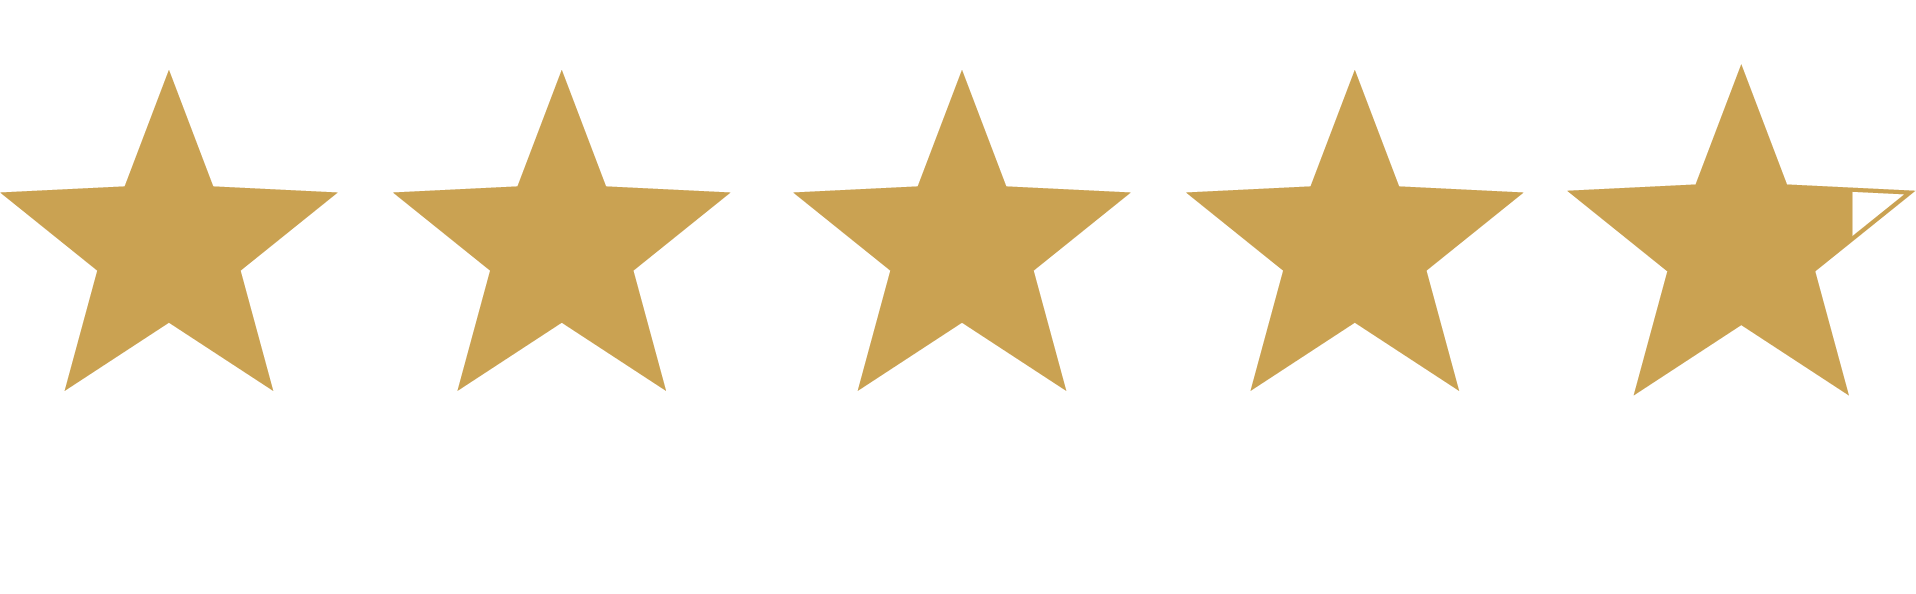 Image of star rating